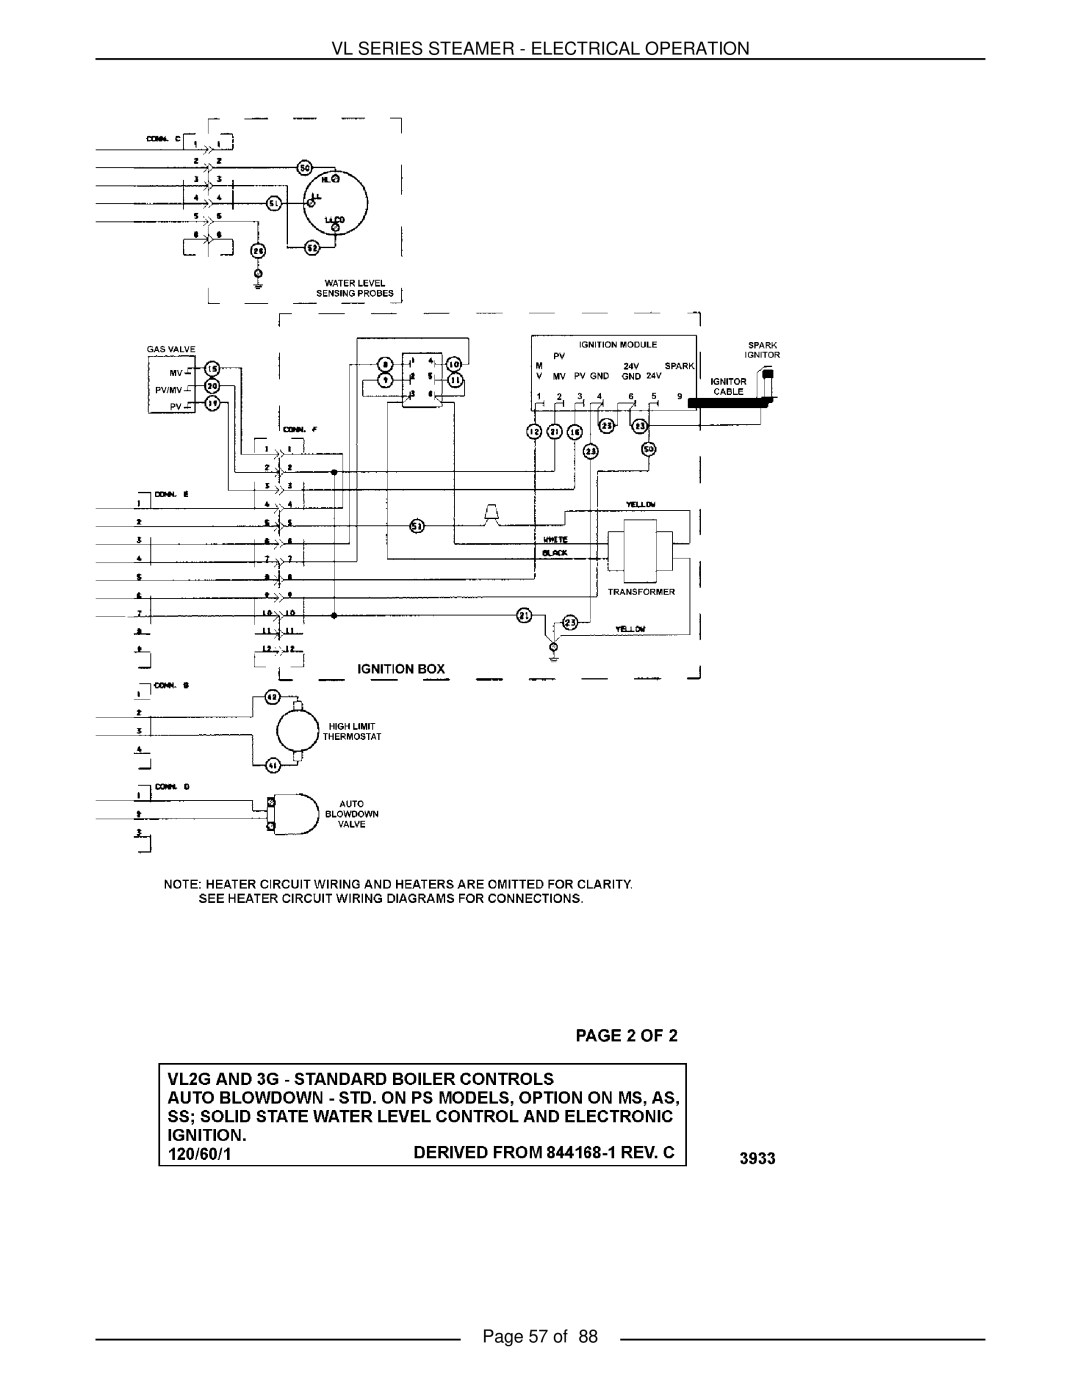 Vulcan-Hart VL2GMS, VL3GMS, VL3GAS, VL2GAS, VL2GSS, VL3GSS, VL3GPS, VL2GPS Vl Series Steamer - Electrical Operation, Page 57 of 